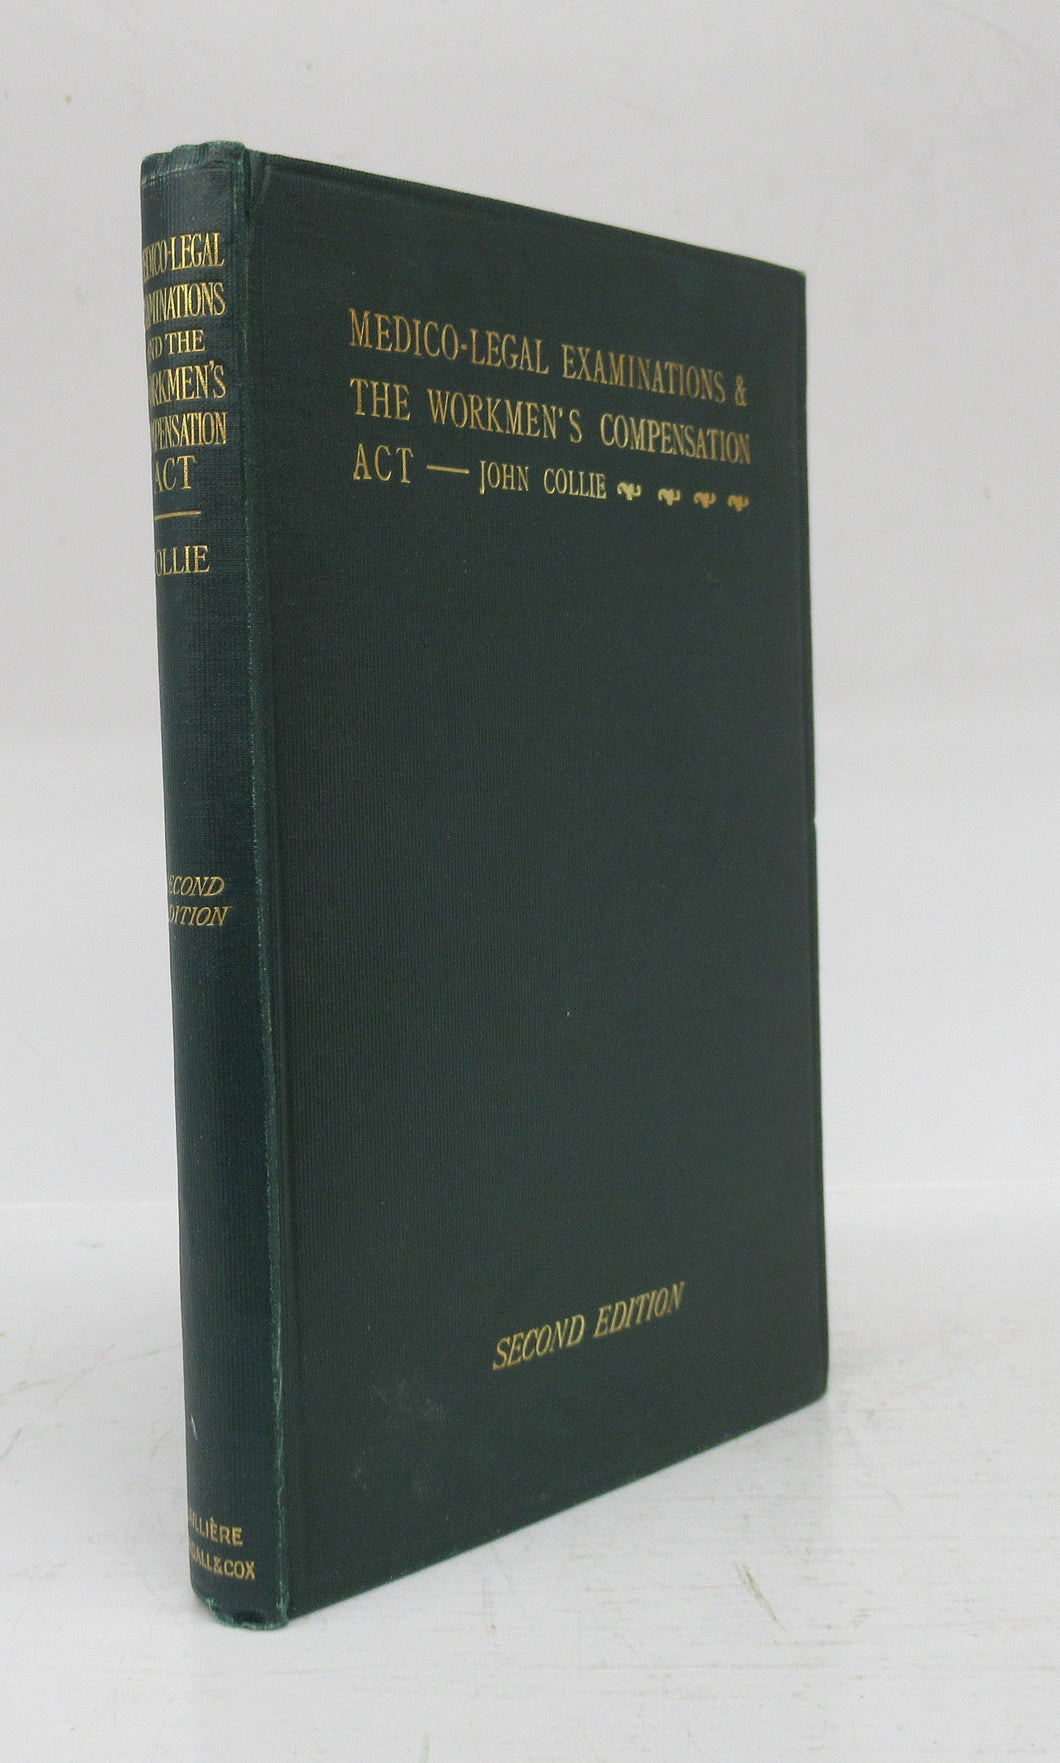 Medico-Legal Examinations & the Workmen's Compensation Act, 1906, as amended by subsequent acts